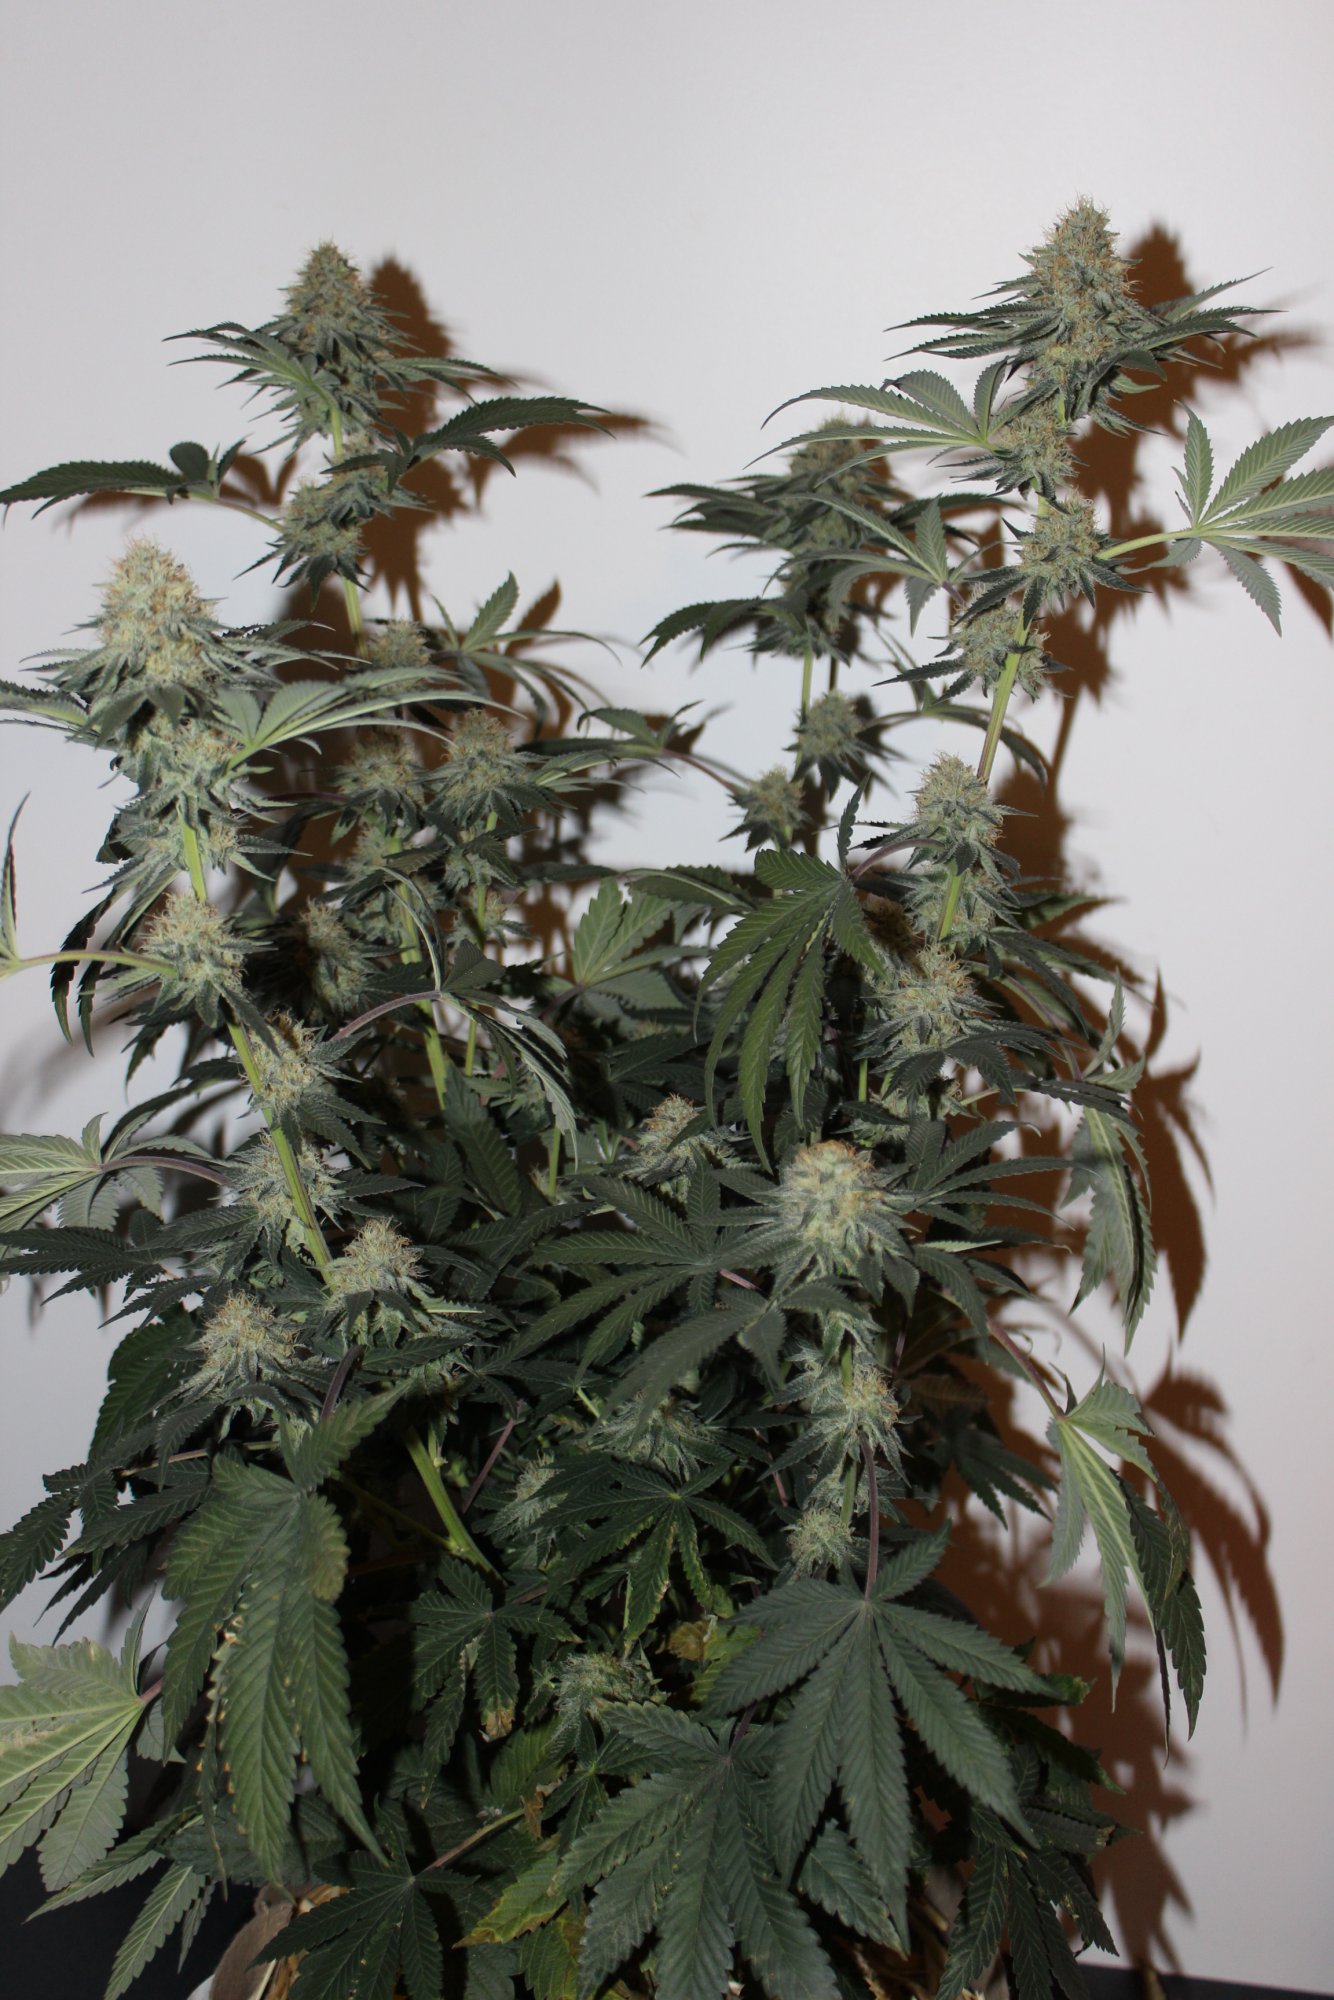 Time Bandit 2 flower day 33